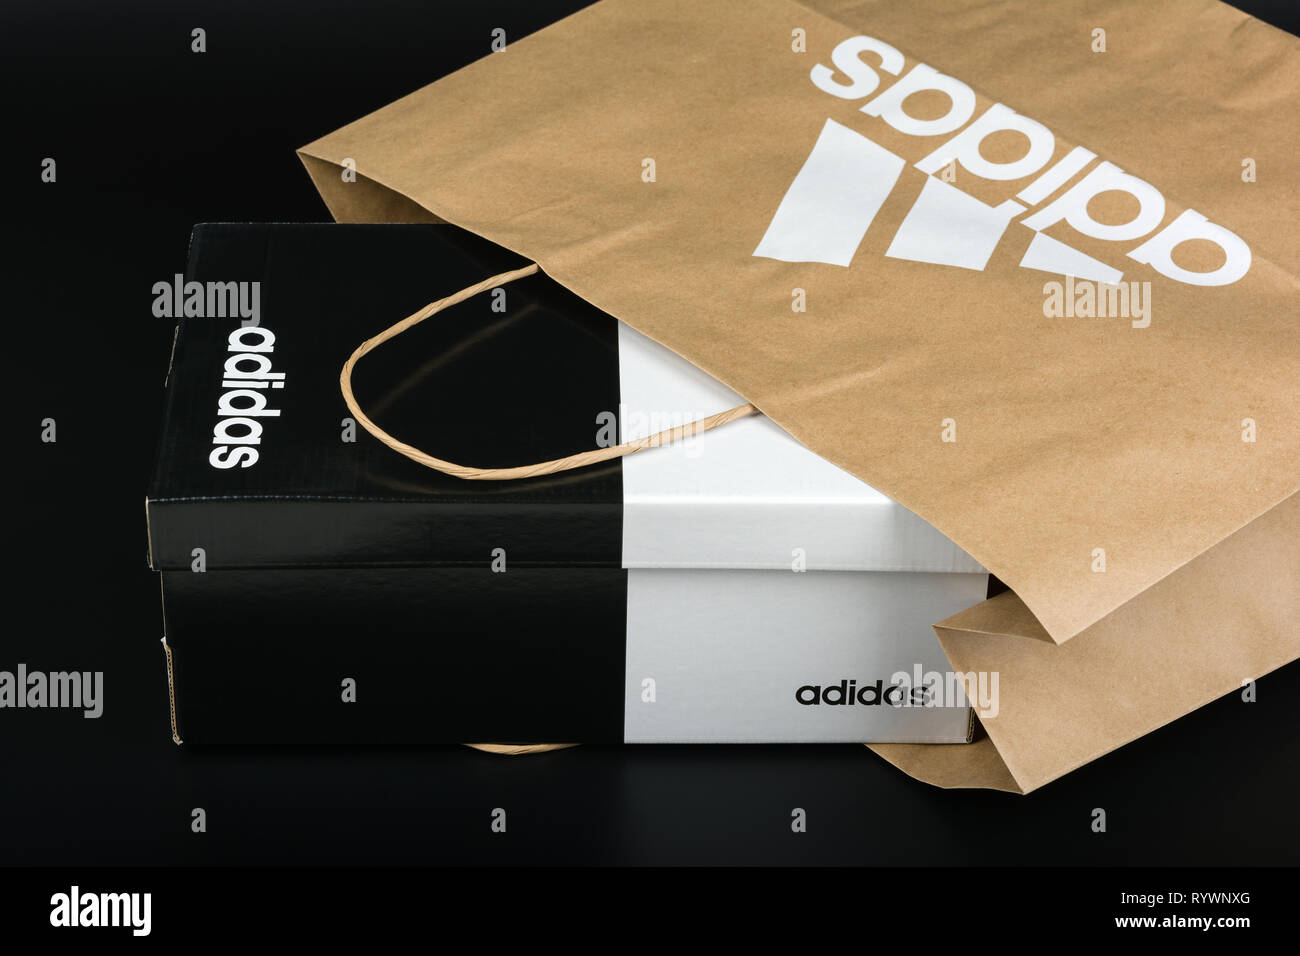 BURGAS, BULGARIA - MARCH 8, 2019: Paper bag with original Adidas logo and Adidas shoes box on black background. Stock Photo